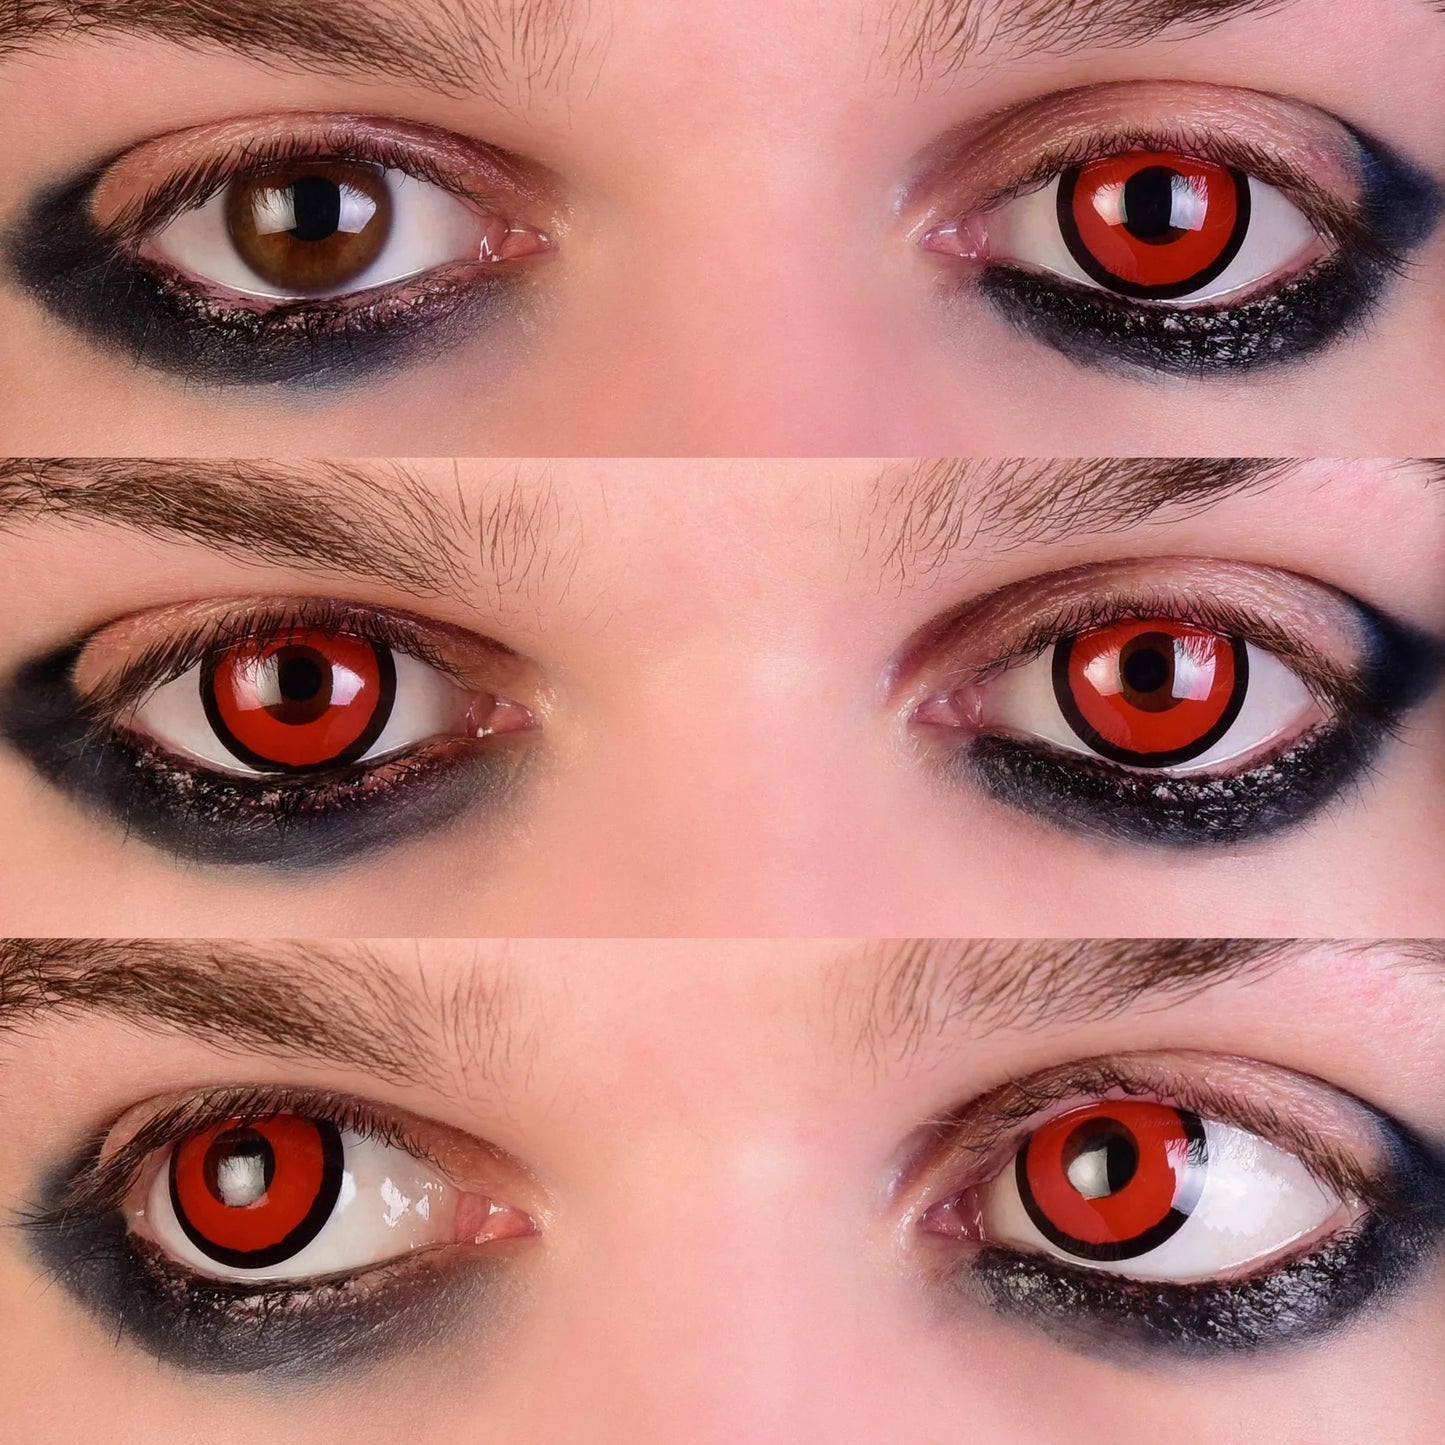 PRIMAL ® Blood Eyes - Red Colored Contact Lenses